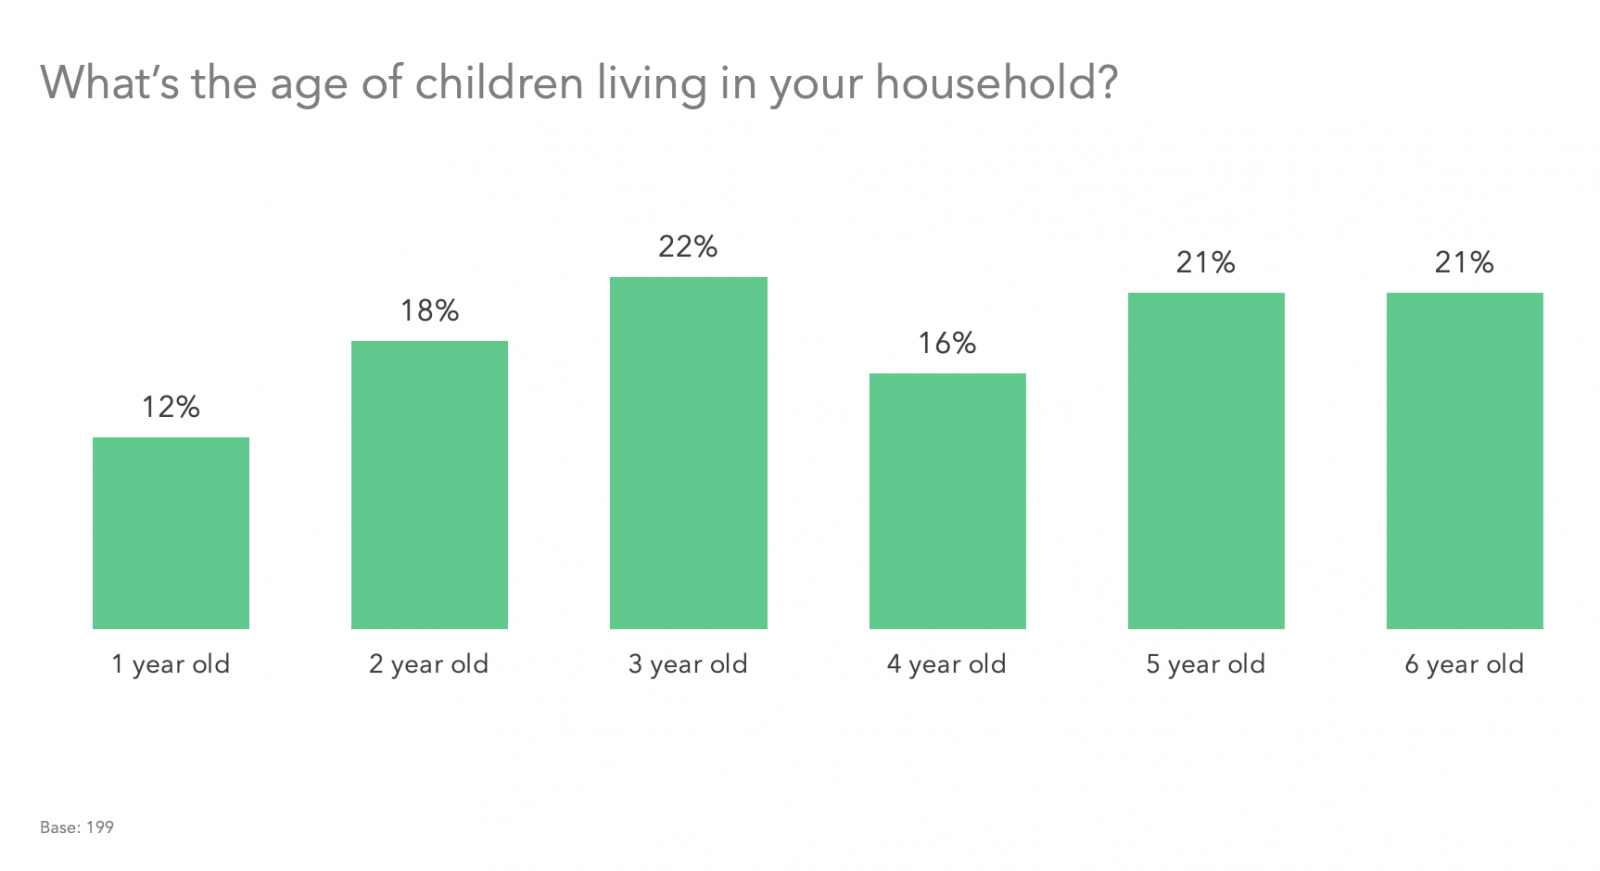 What's the age of children living in your household?